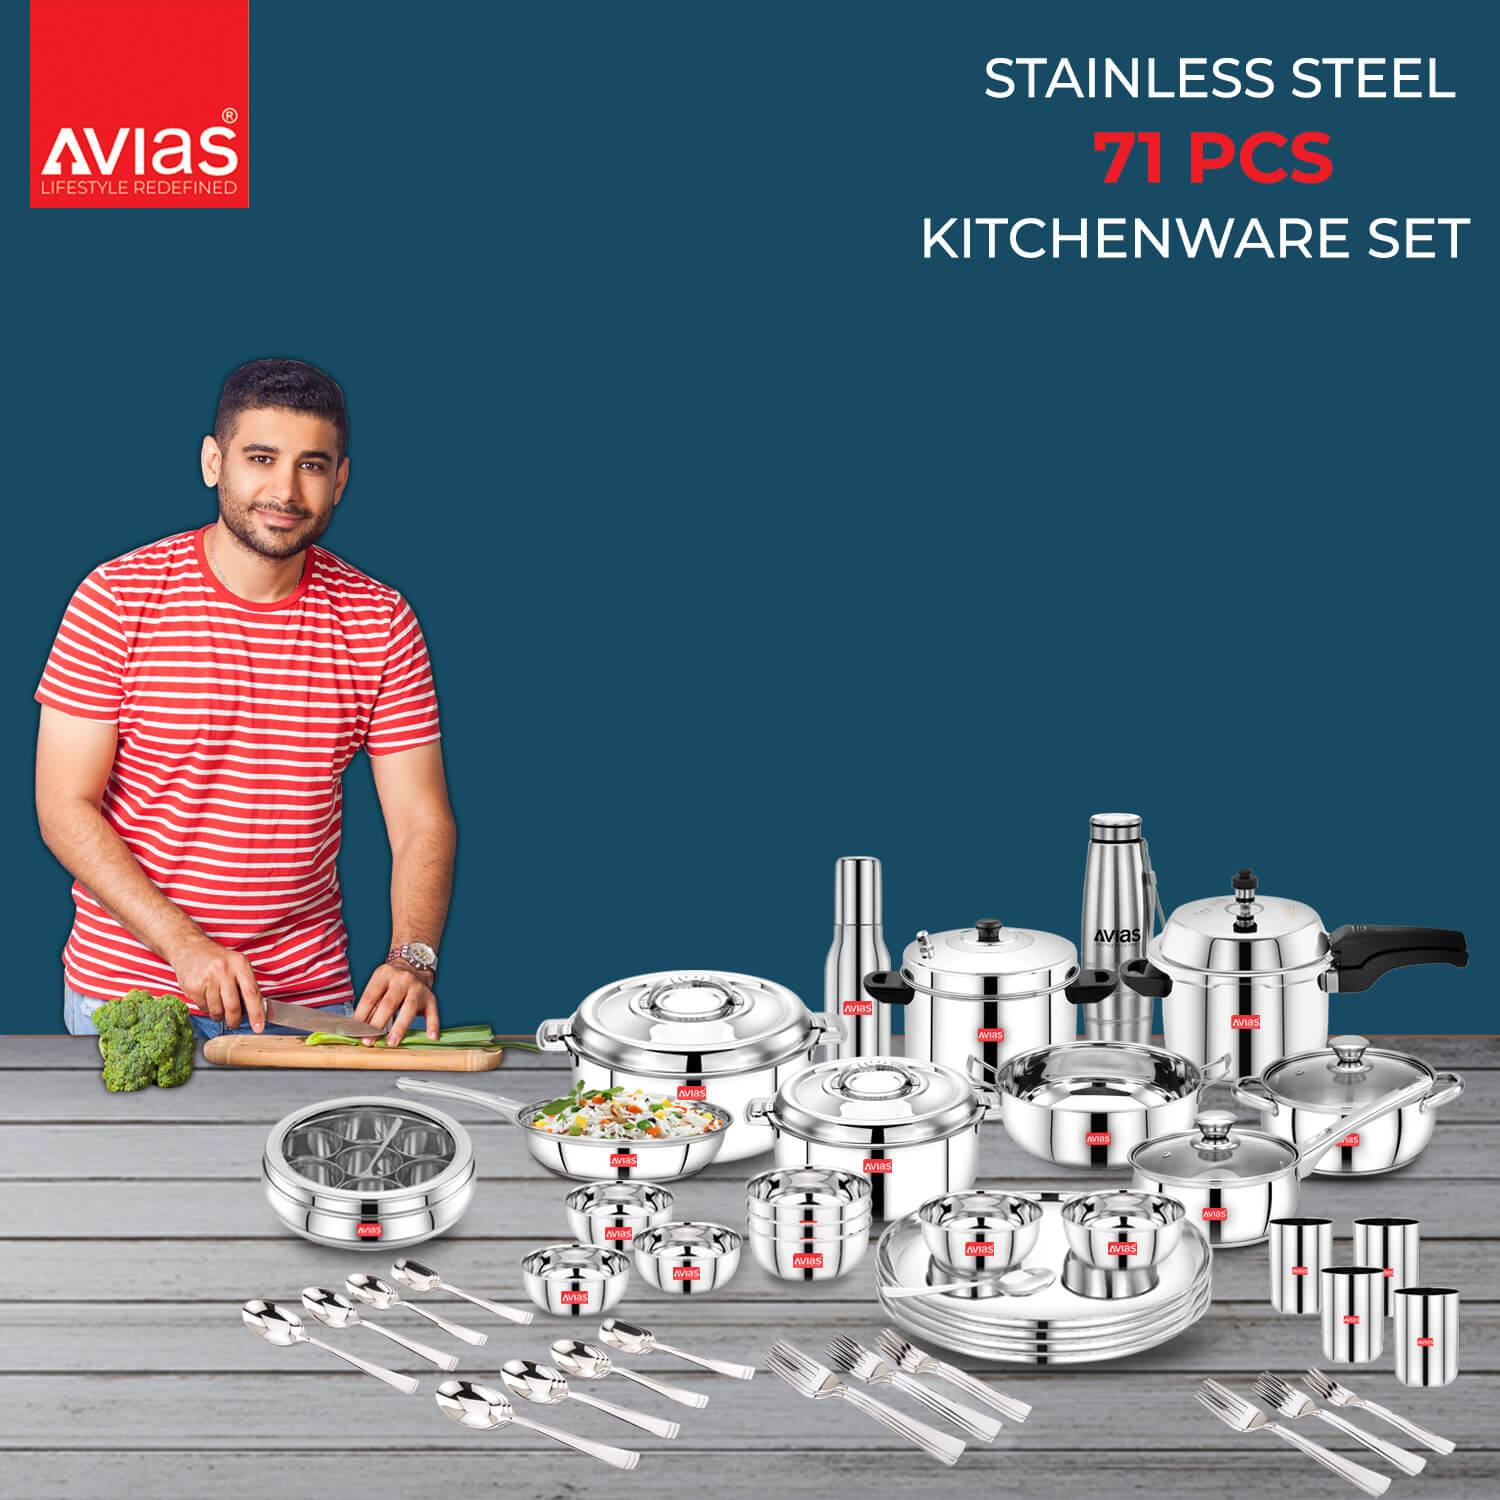 Stainless Steel 71 PCS Kitchen Set for all purpose in the kitchen